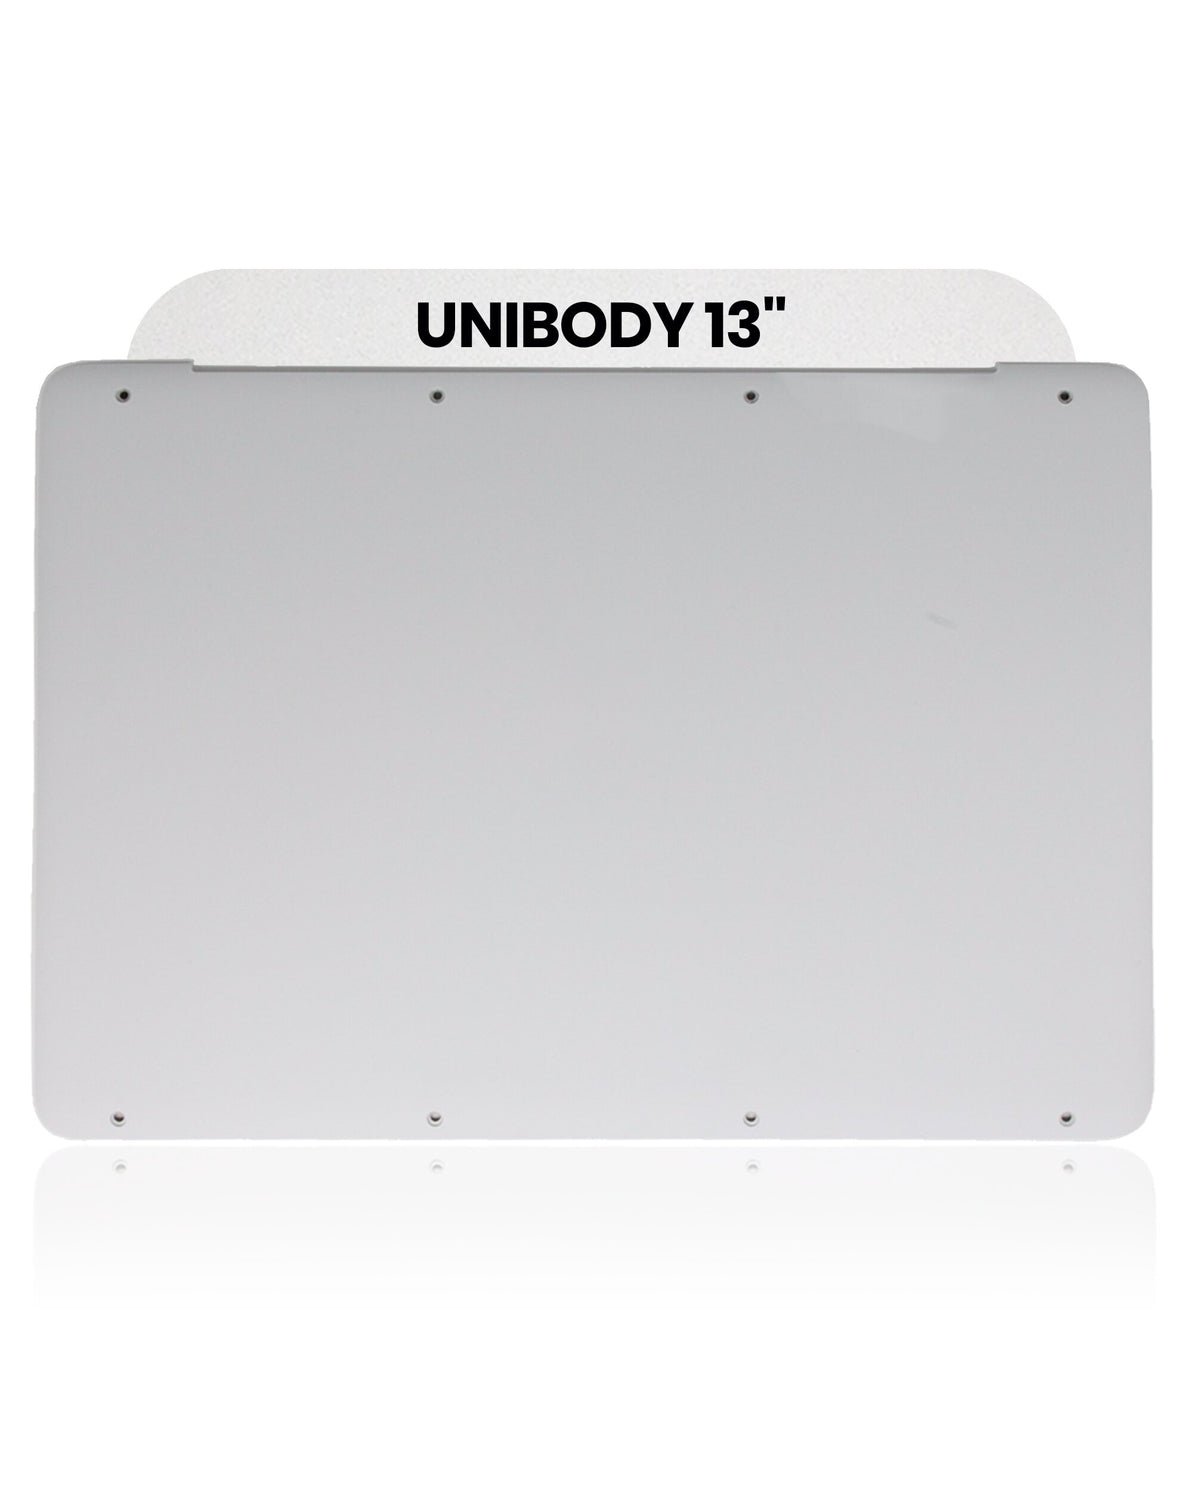 BOTTOM CASE COMPATIBLE FOR MACBOOK UNIBODY 13" (A1342 / LATE 2009 / MID 2010)